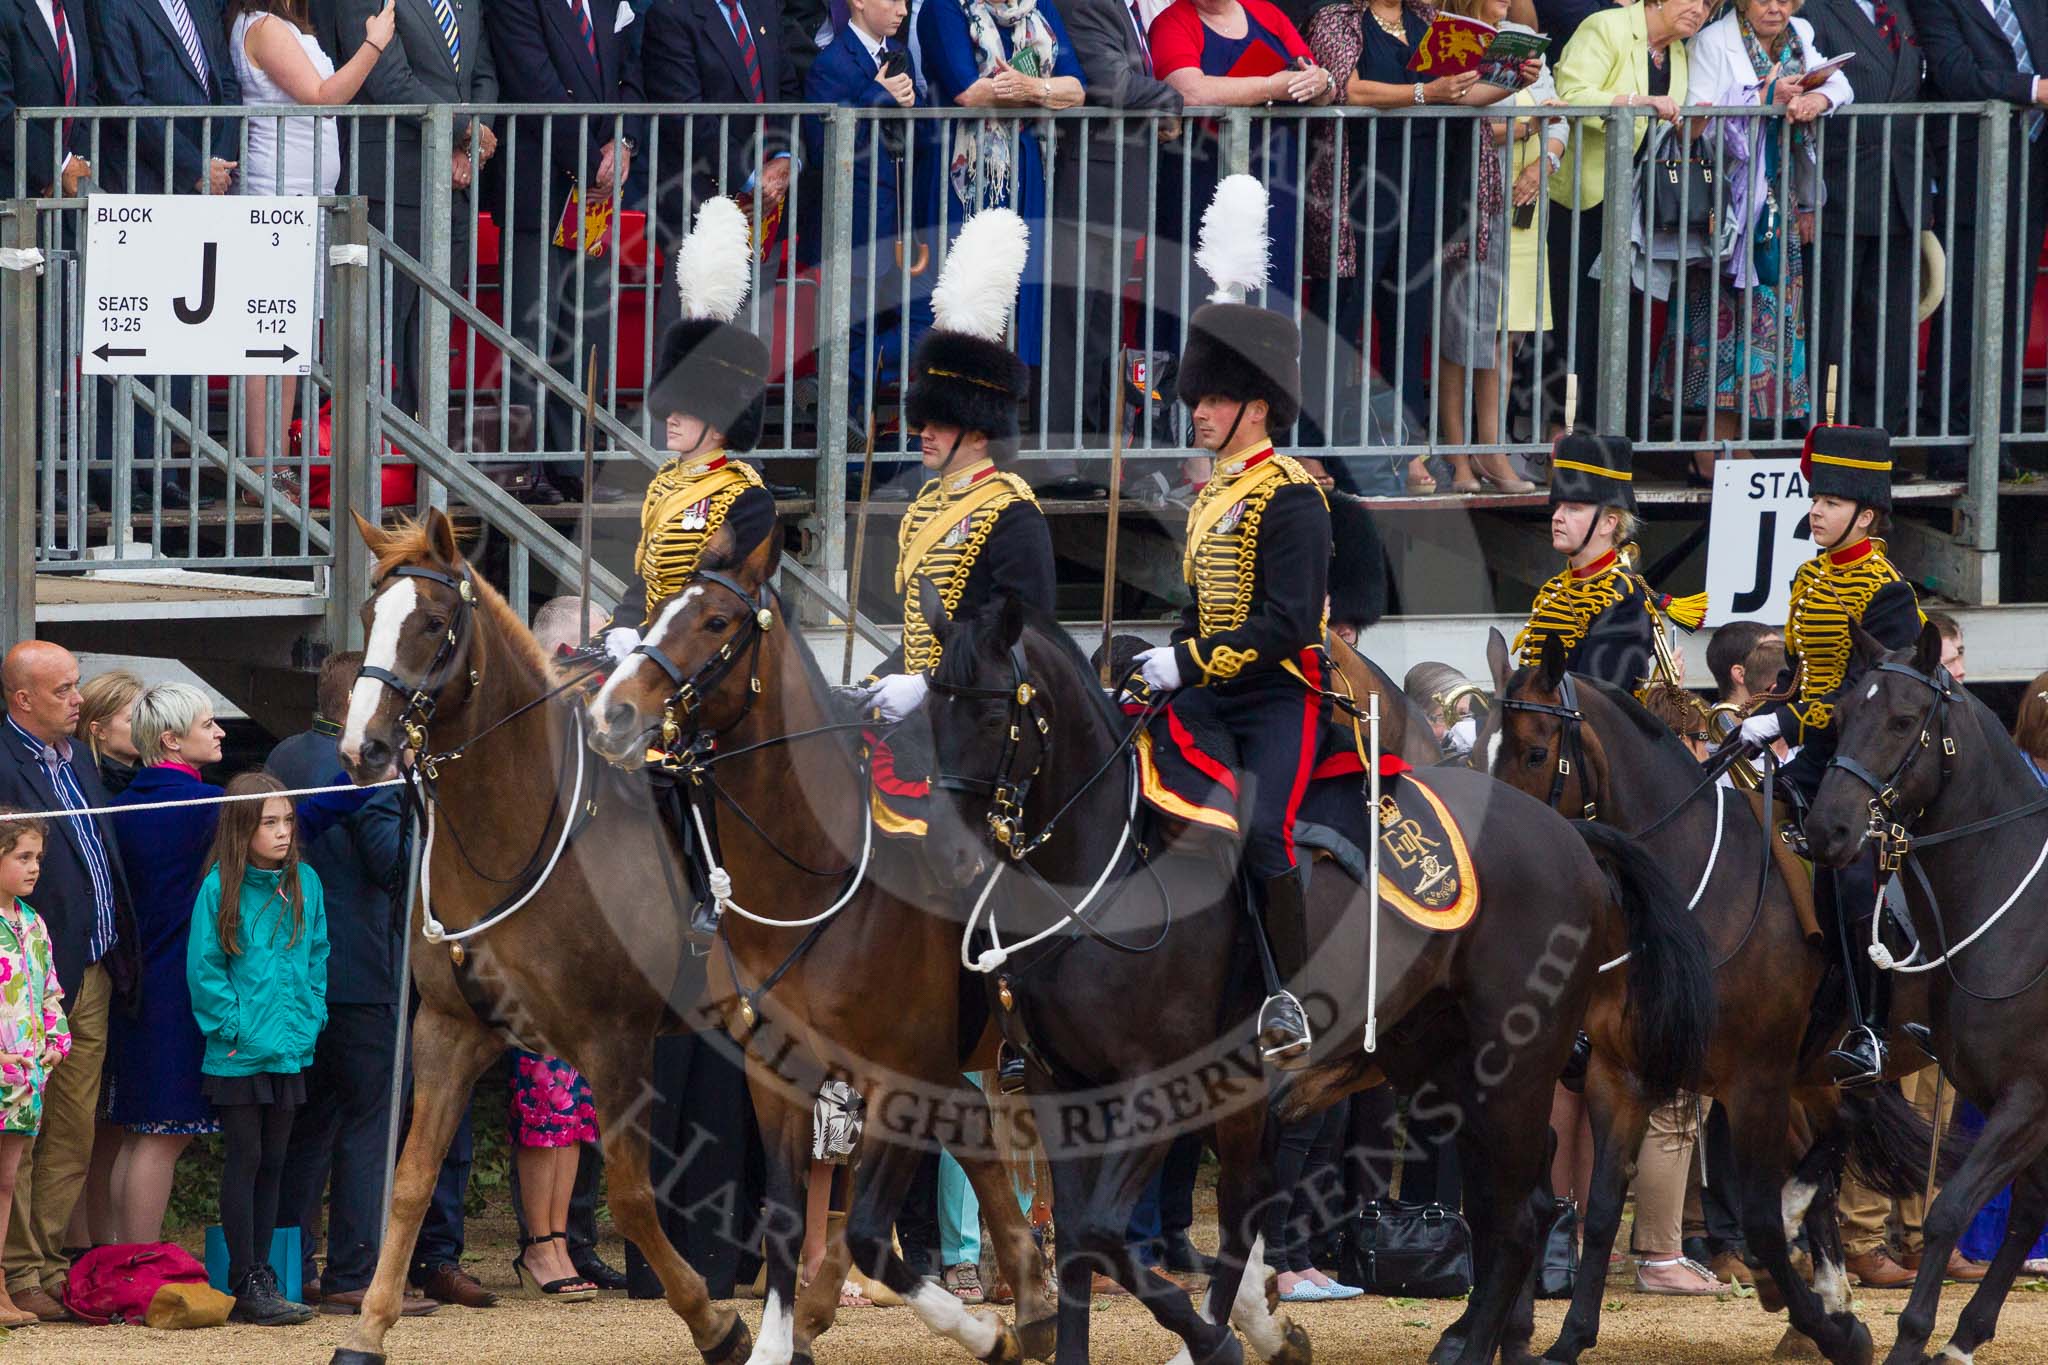 Trooping the Colour 2015. Image #576, 13 June 2015 11:56 Horse Guards Parade, London, UK